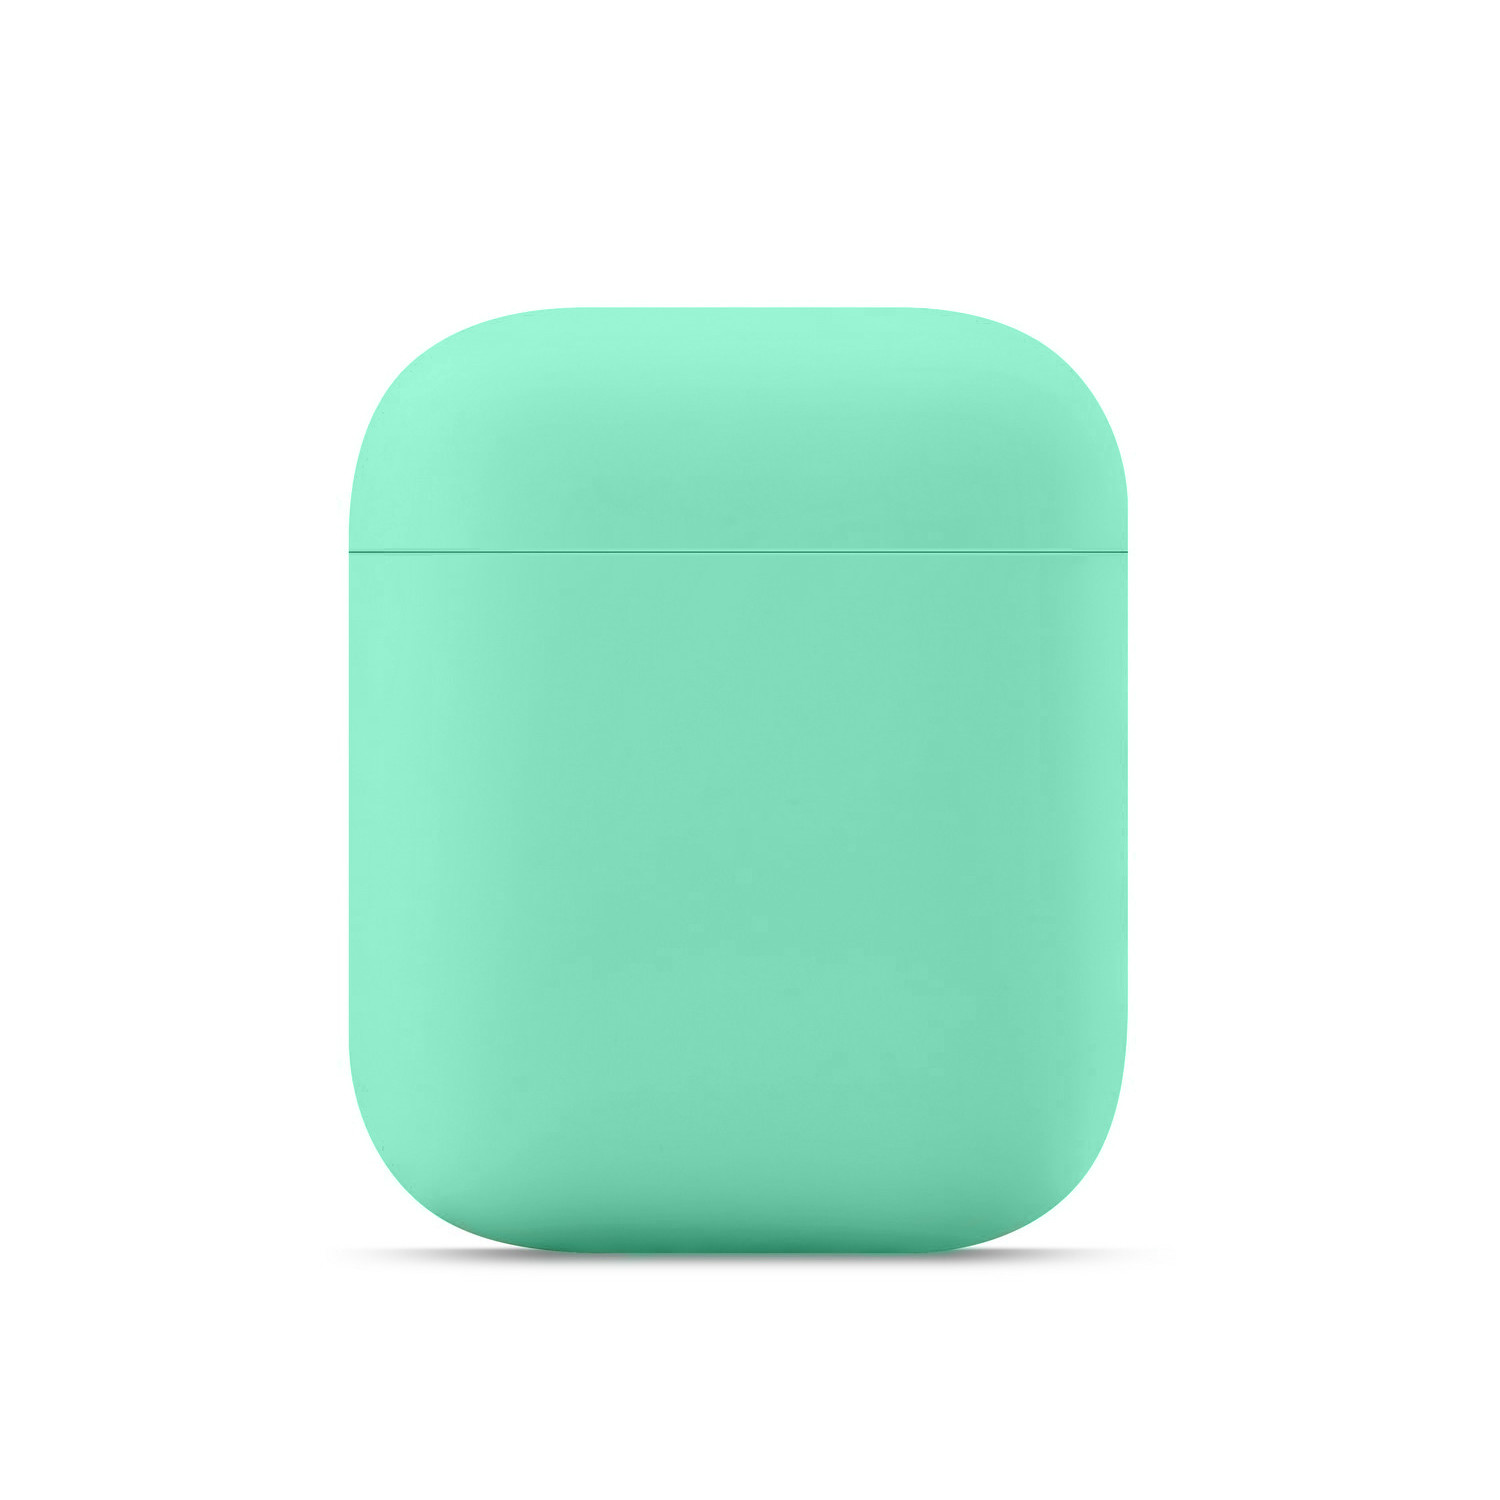 Original Silicone Case for AirPods Spearmint Green (12) - 1